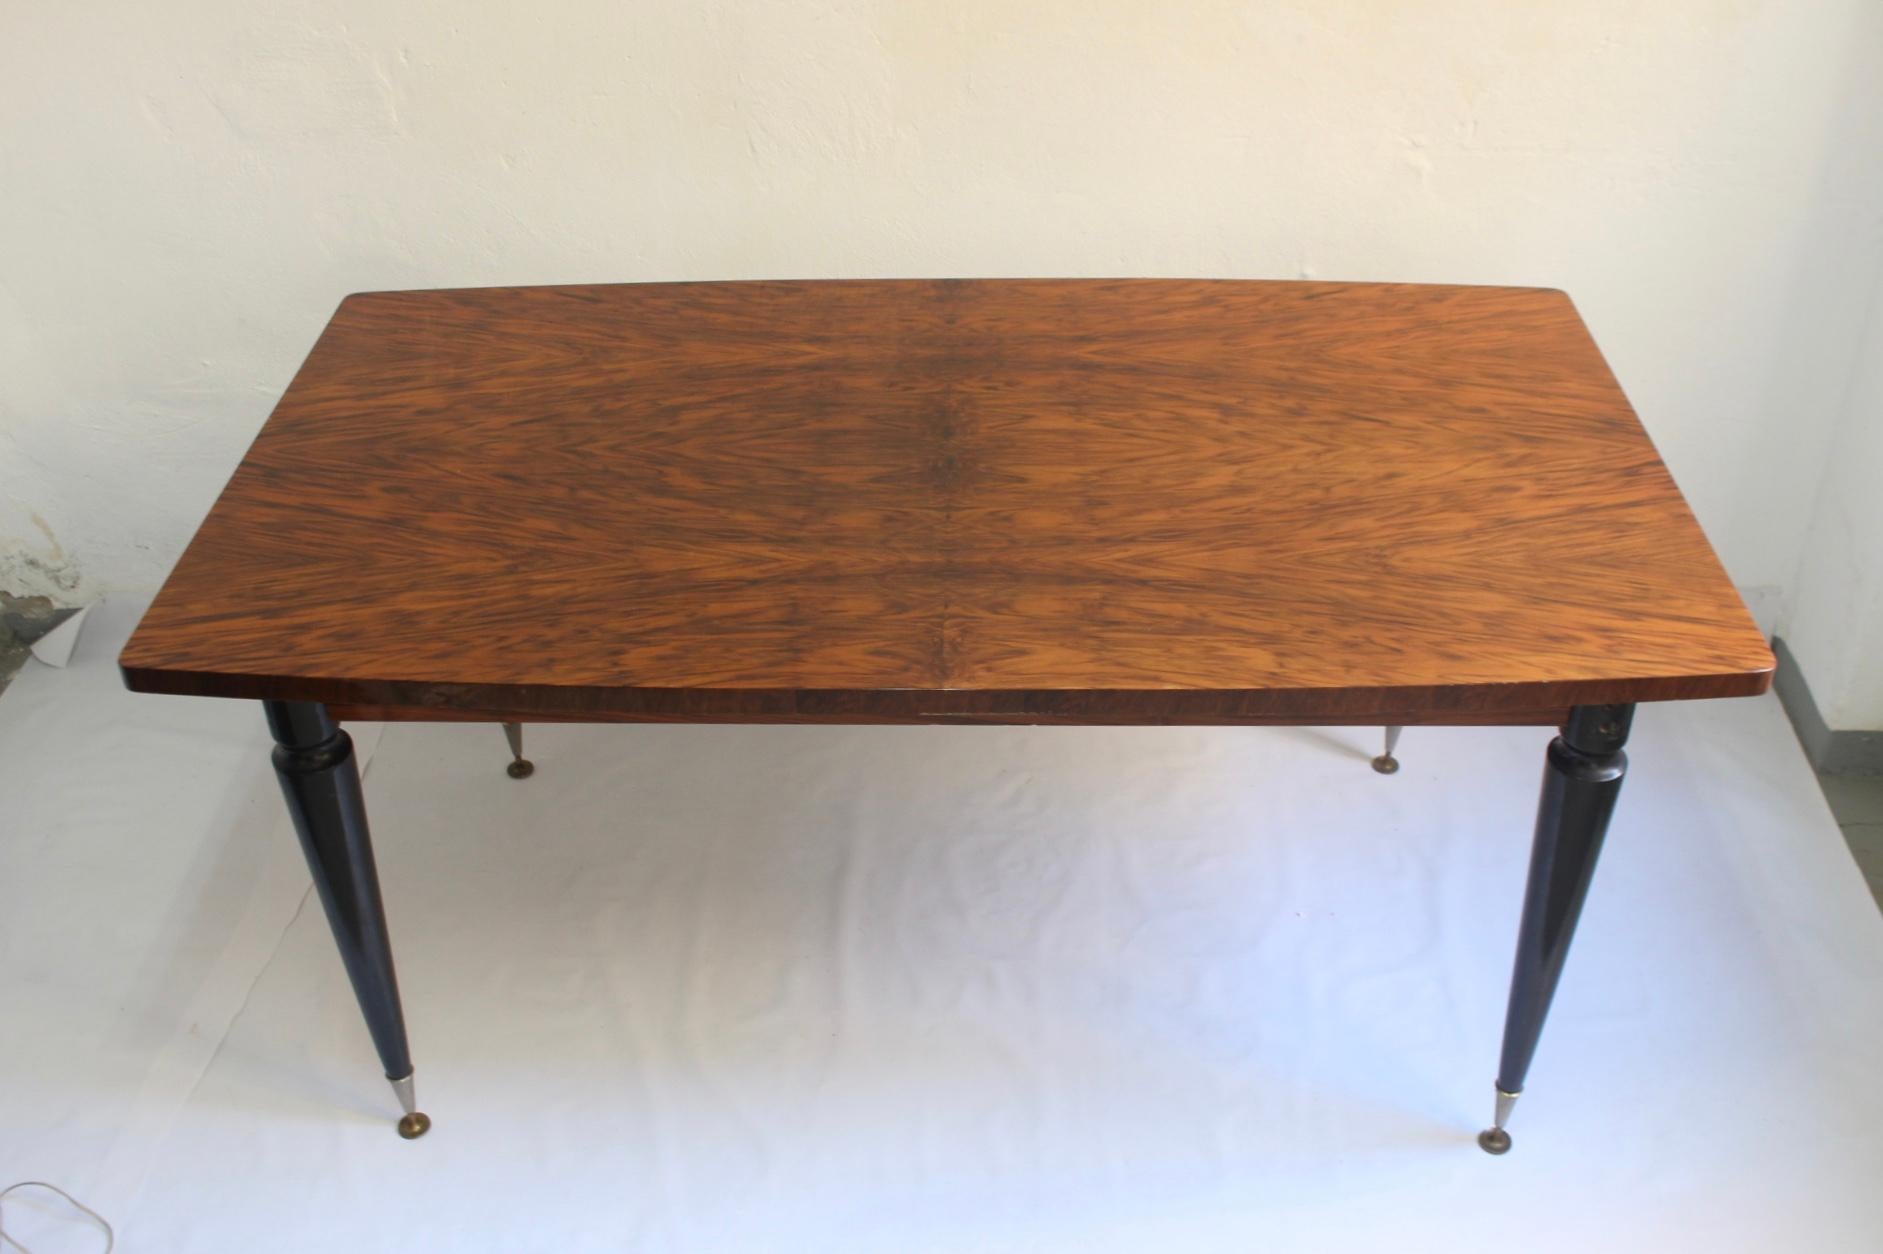 French Art Deco High Quality American Walnut Burl Extensible Dining Table, 1940s For Sale 1